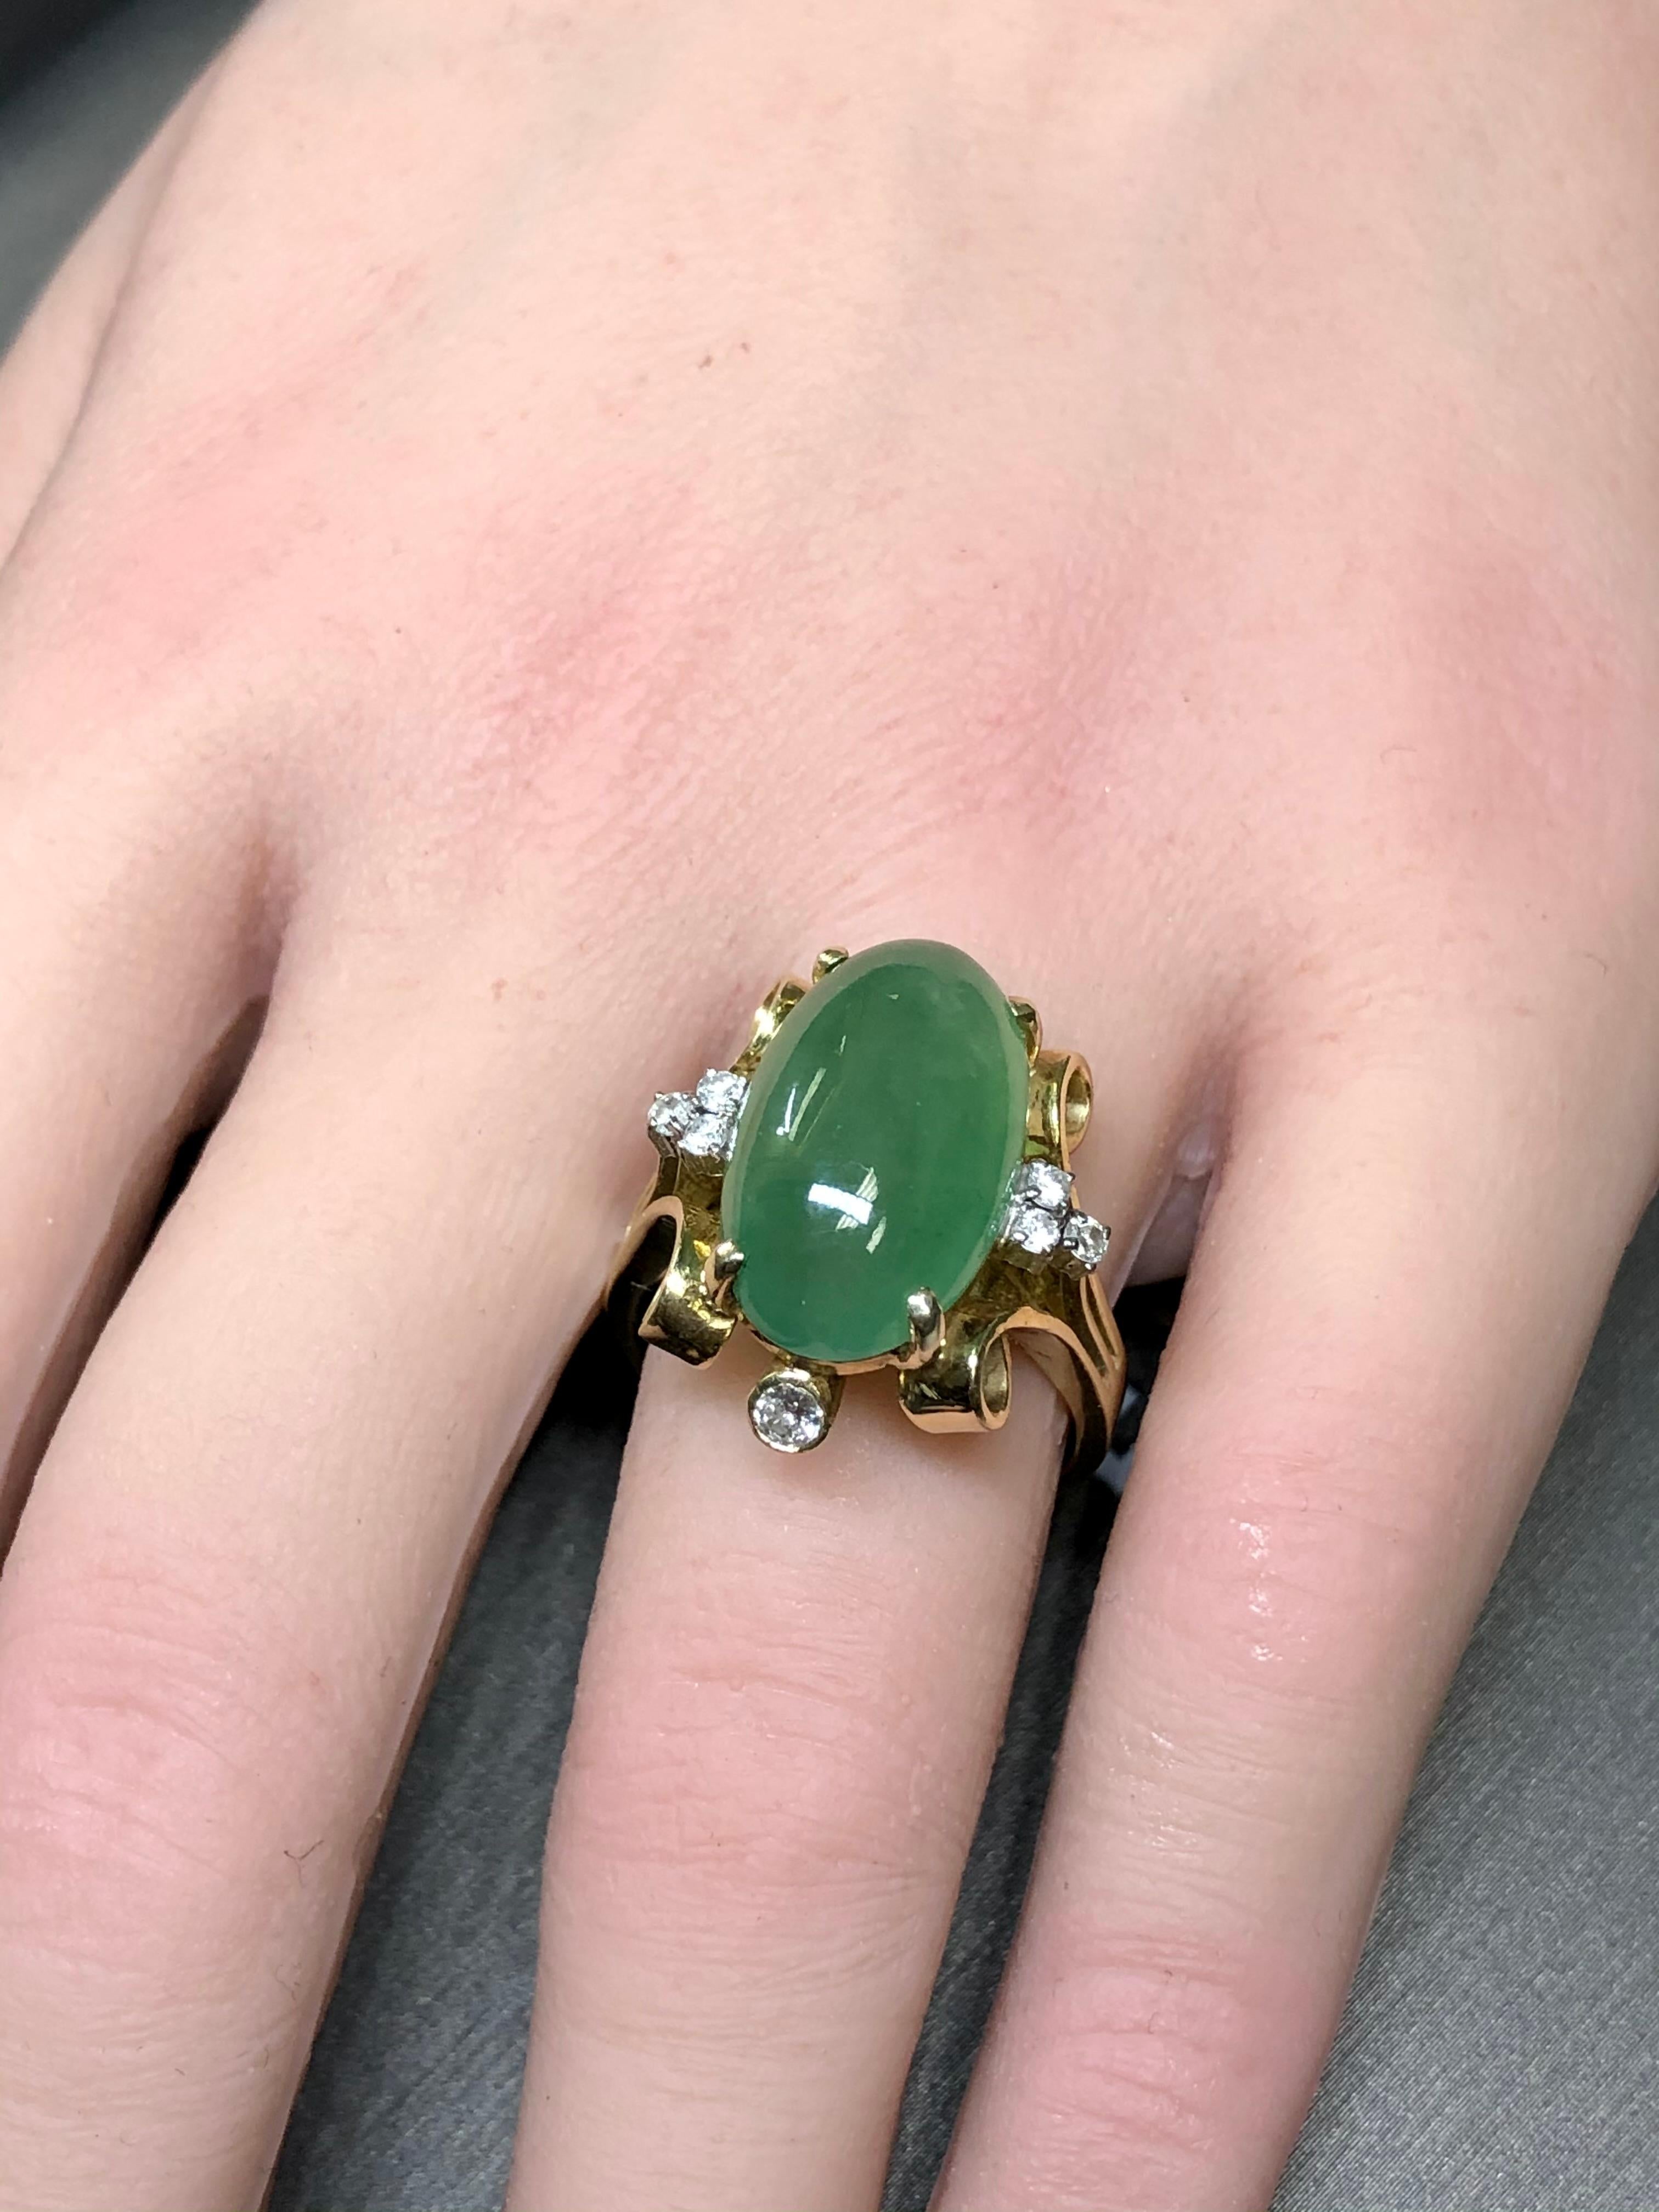 Vintage 1950's 14K Cabochon Jade Diamond Scroll Cocktail Ring 17.28cttw Sz 8.5 For Sale 1